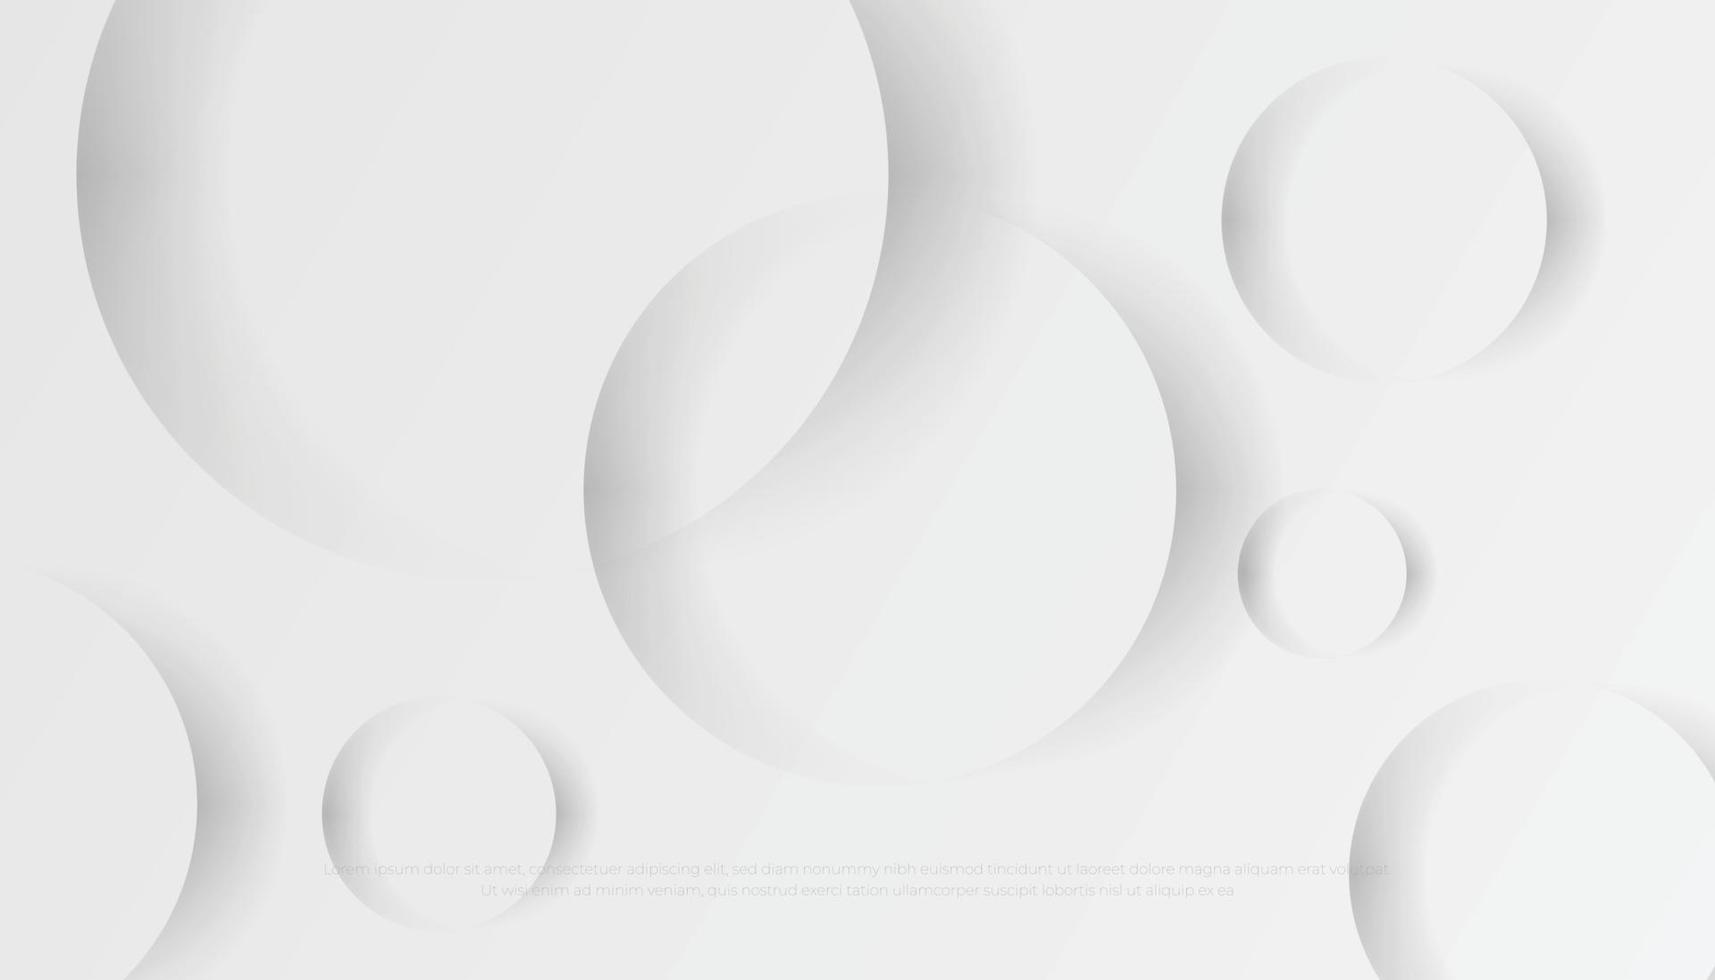 Abstract Transparent Circles with Shadow on White Grey Background. Vector Illustration